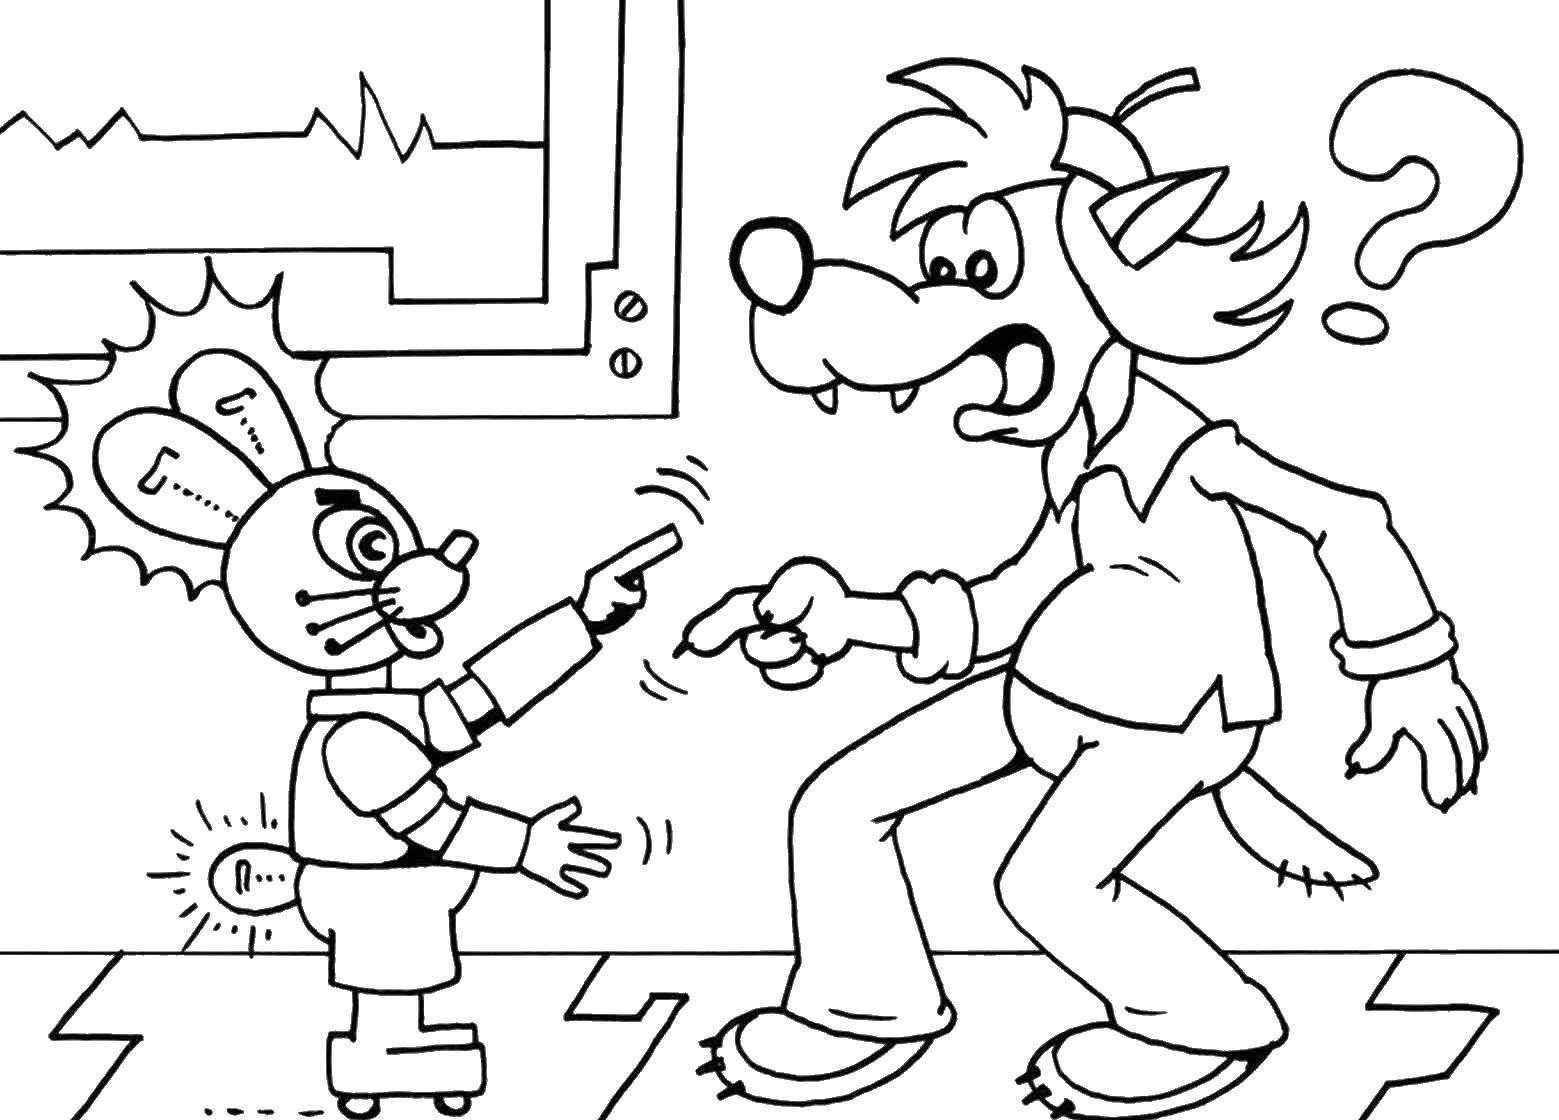 Coloring Oh wait hare. Category cartoons. Tags:  hare, wolf, cartoon.